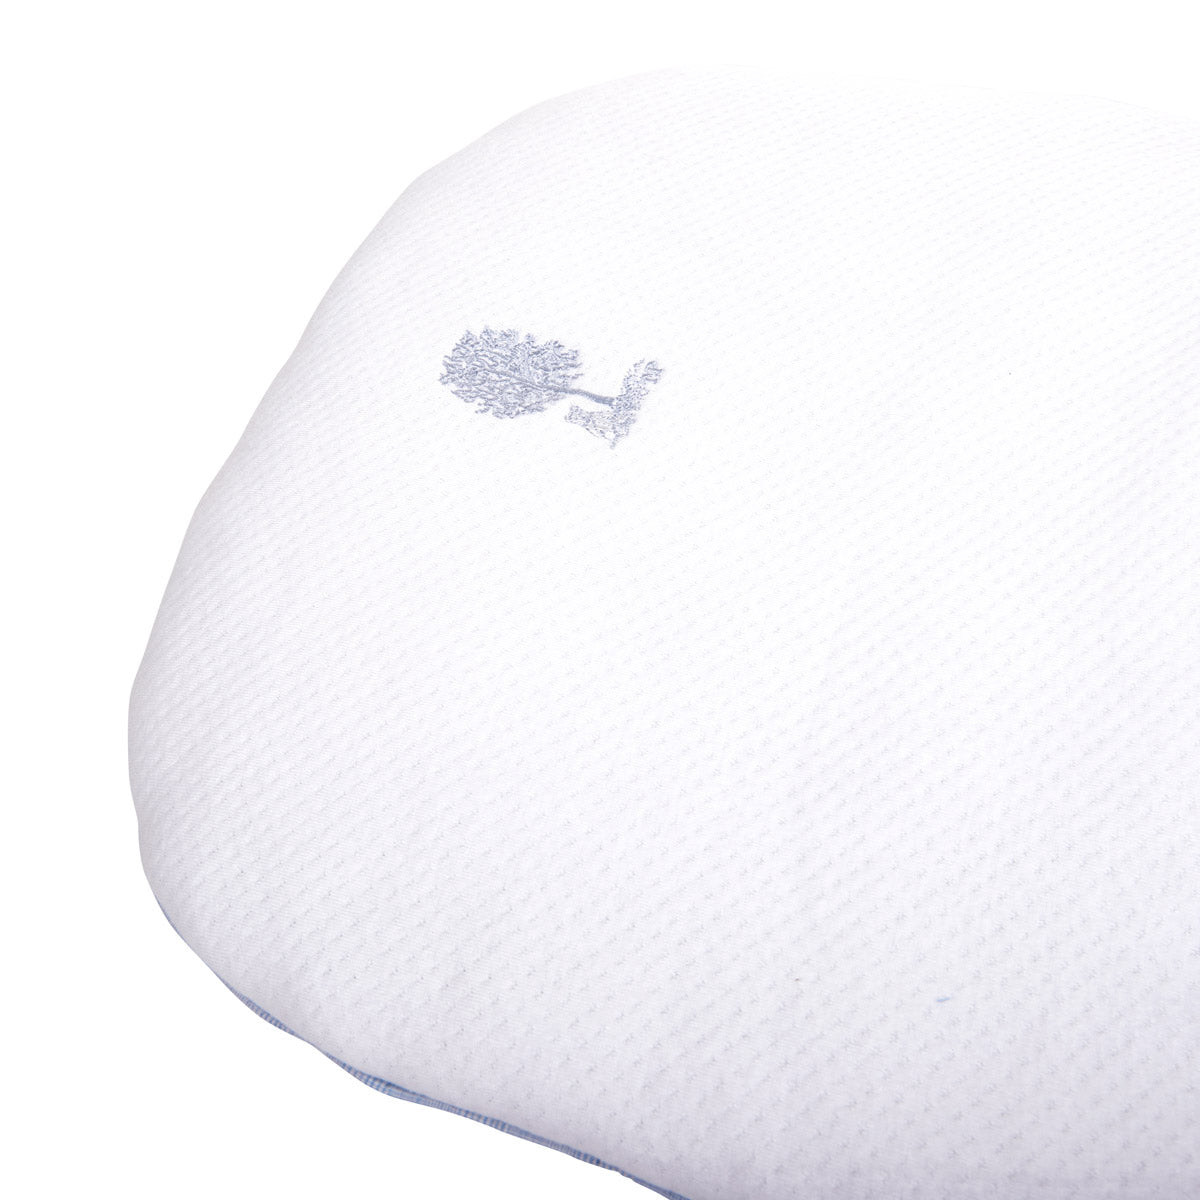 Theophile & Patachou Baby Seat Cover - Sweet Blue / White